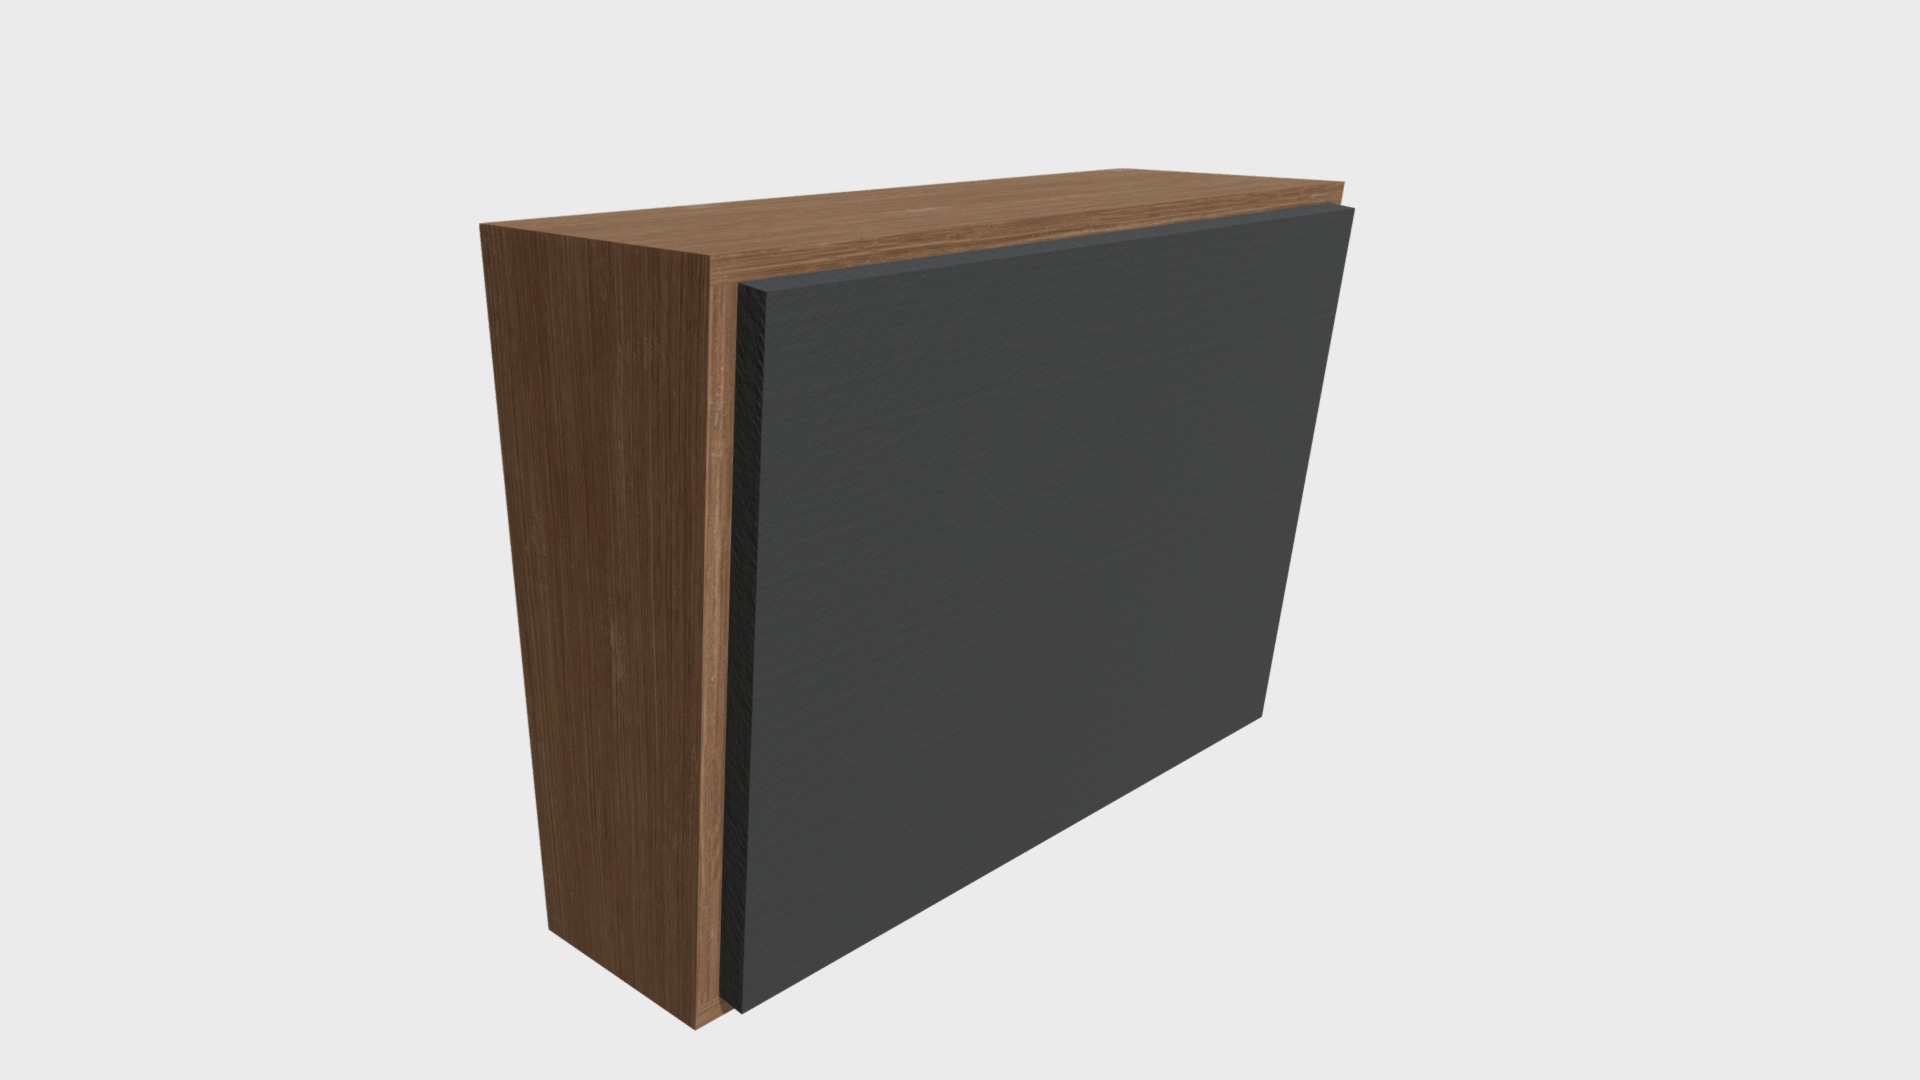 3D model Intercom speaker - This is a 3D model of the Intercom speaker. The 3D model is about a wooden frame with a black frame.